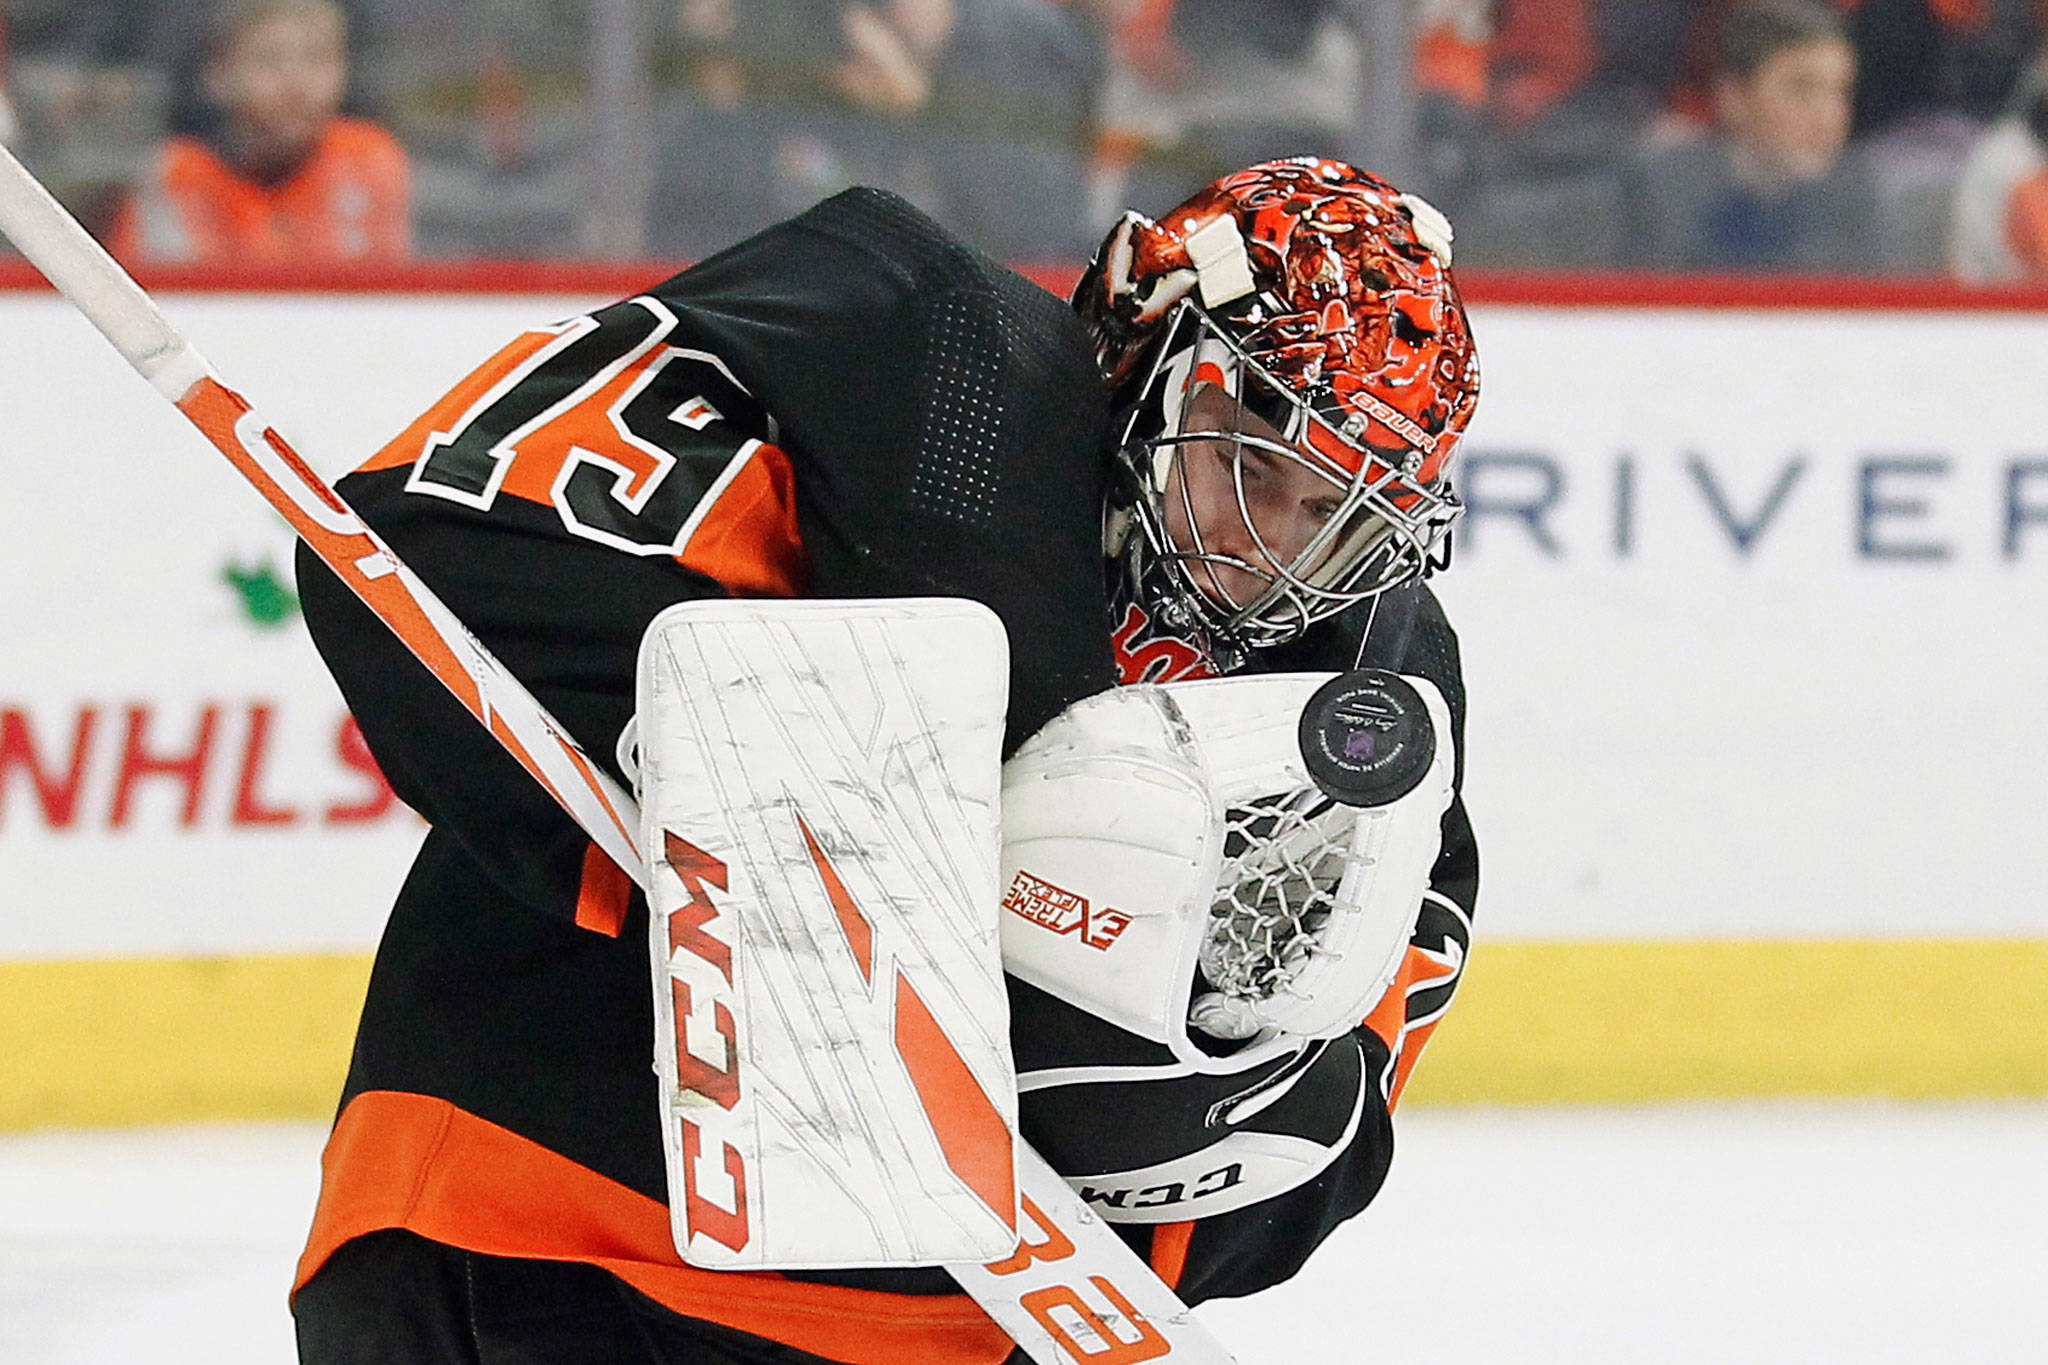 Top 10 Carter Hart Saves from 2019-20